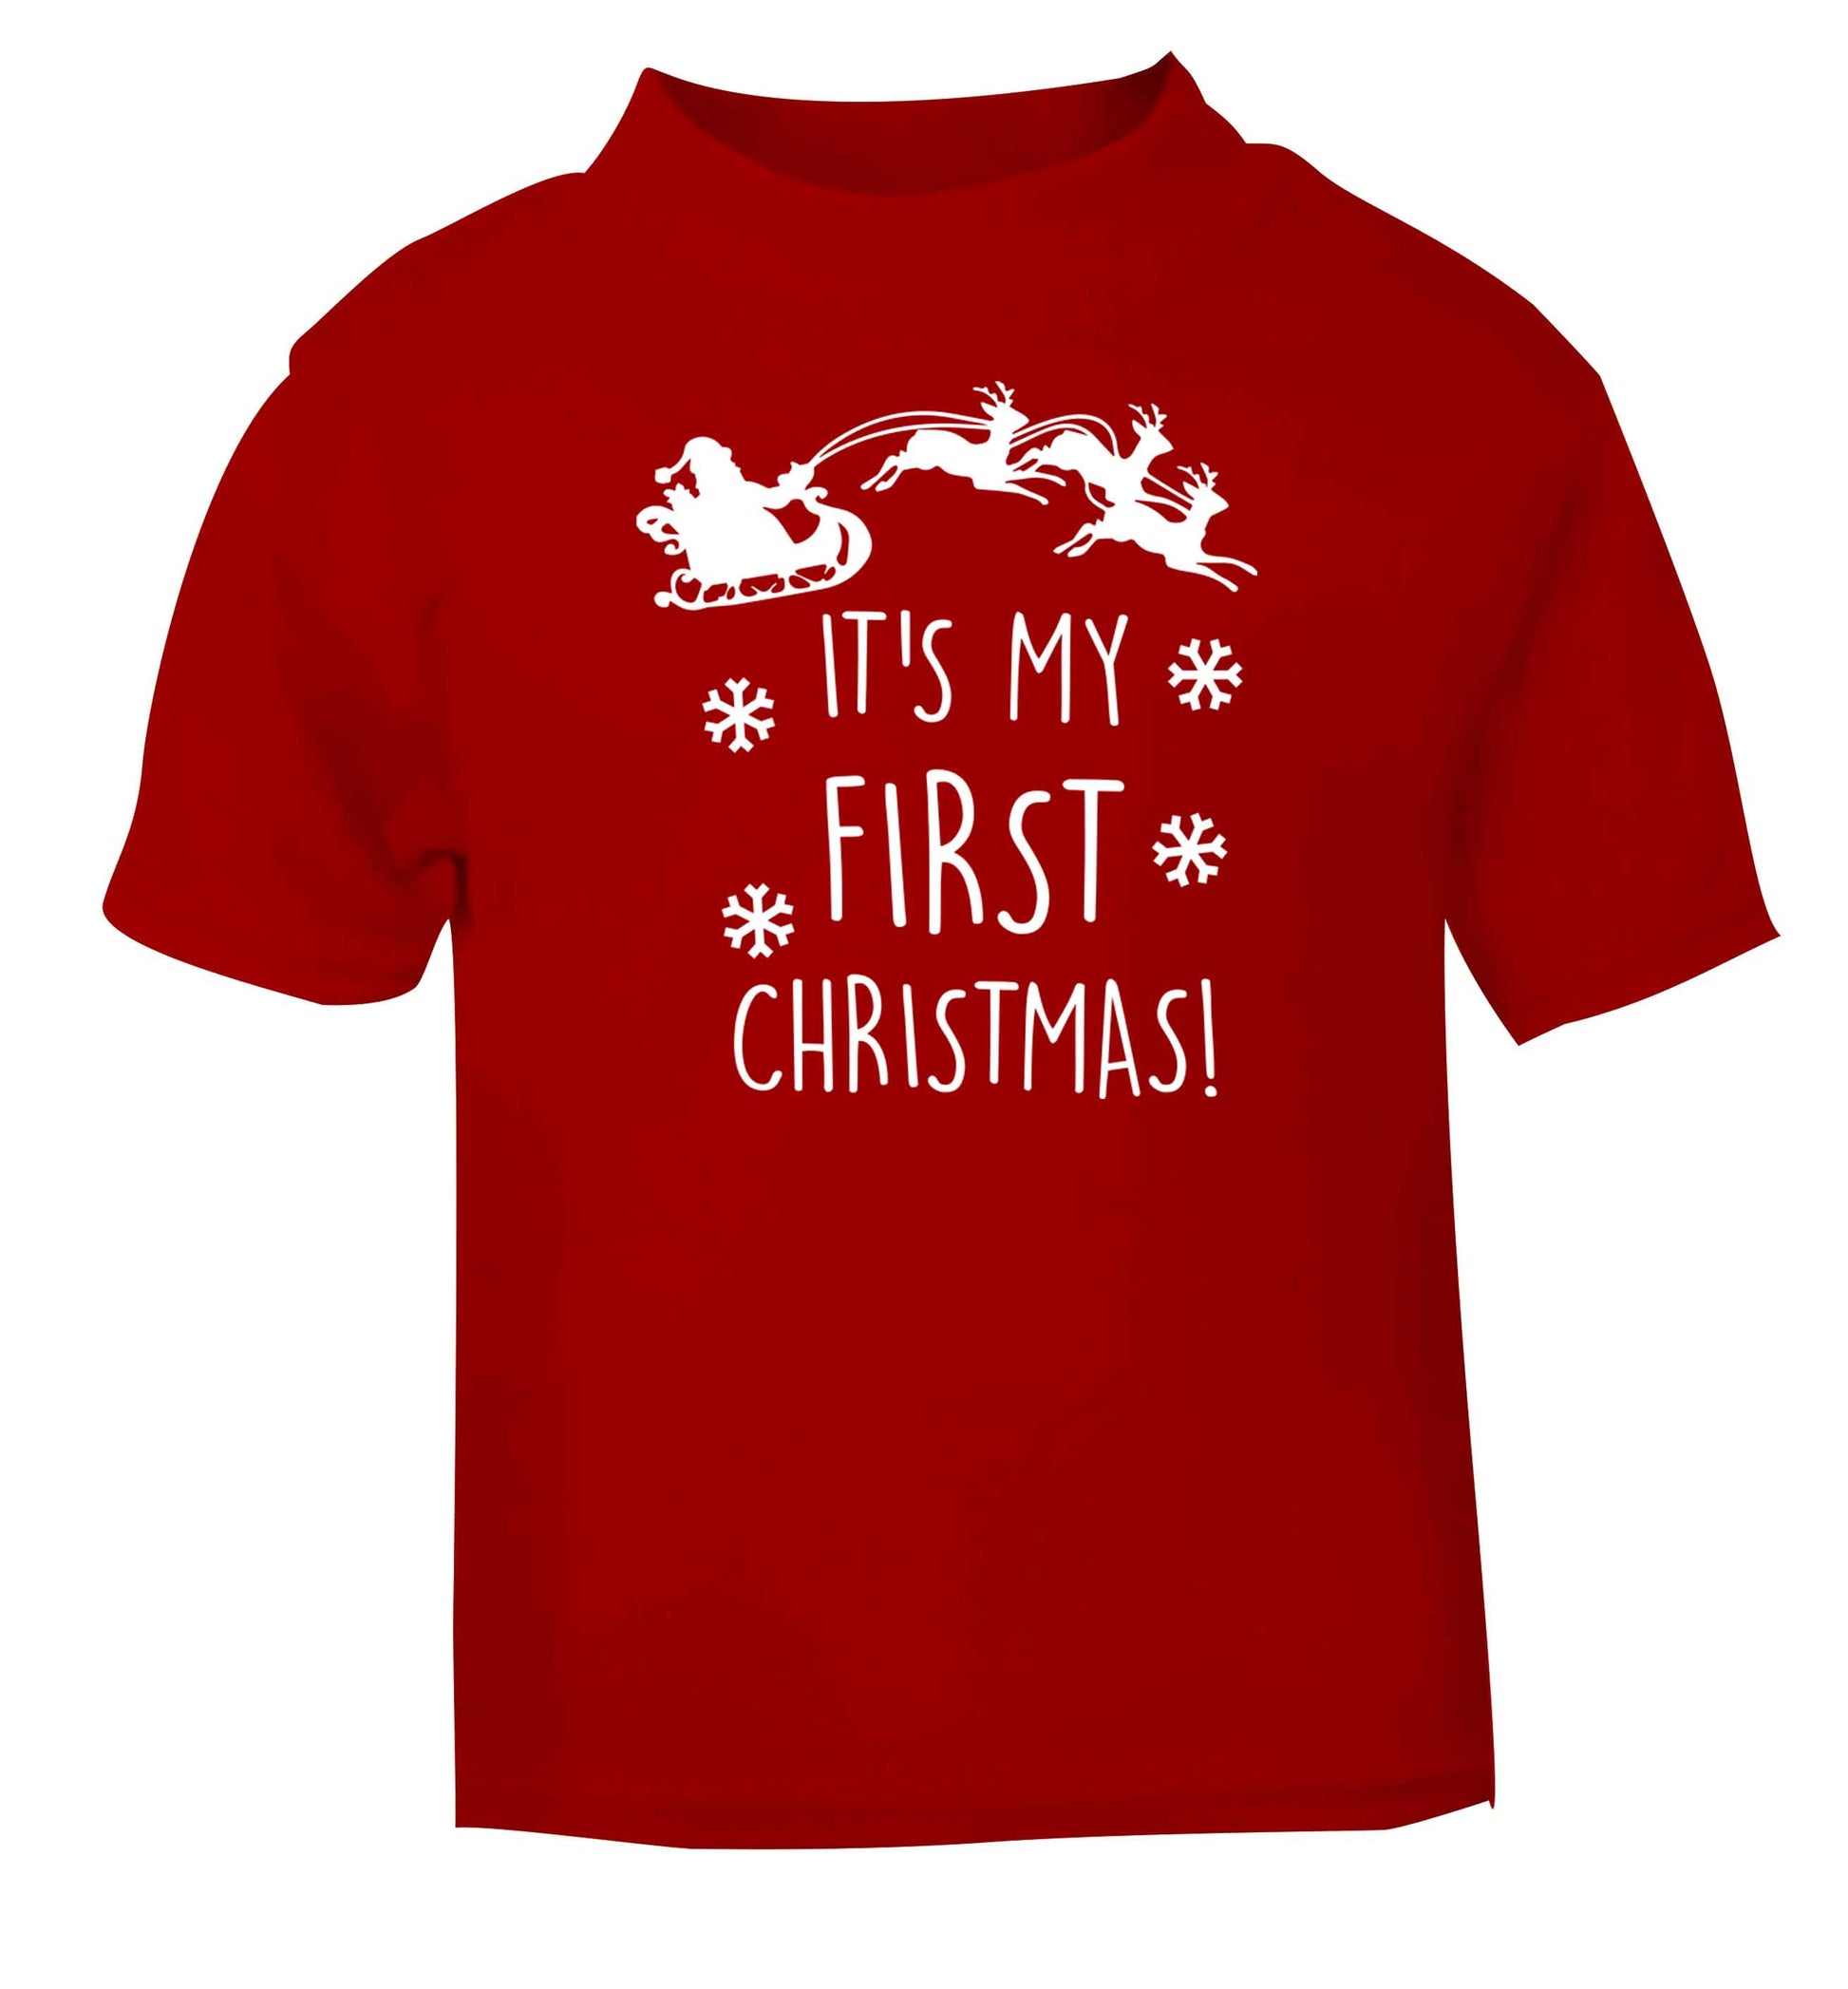 It's my first Christmas - Santa sleigh text red baby toddler Tshirt 2 Years